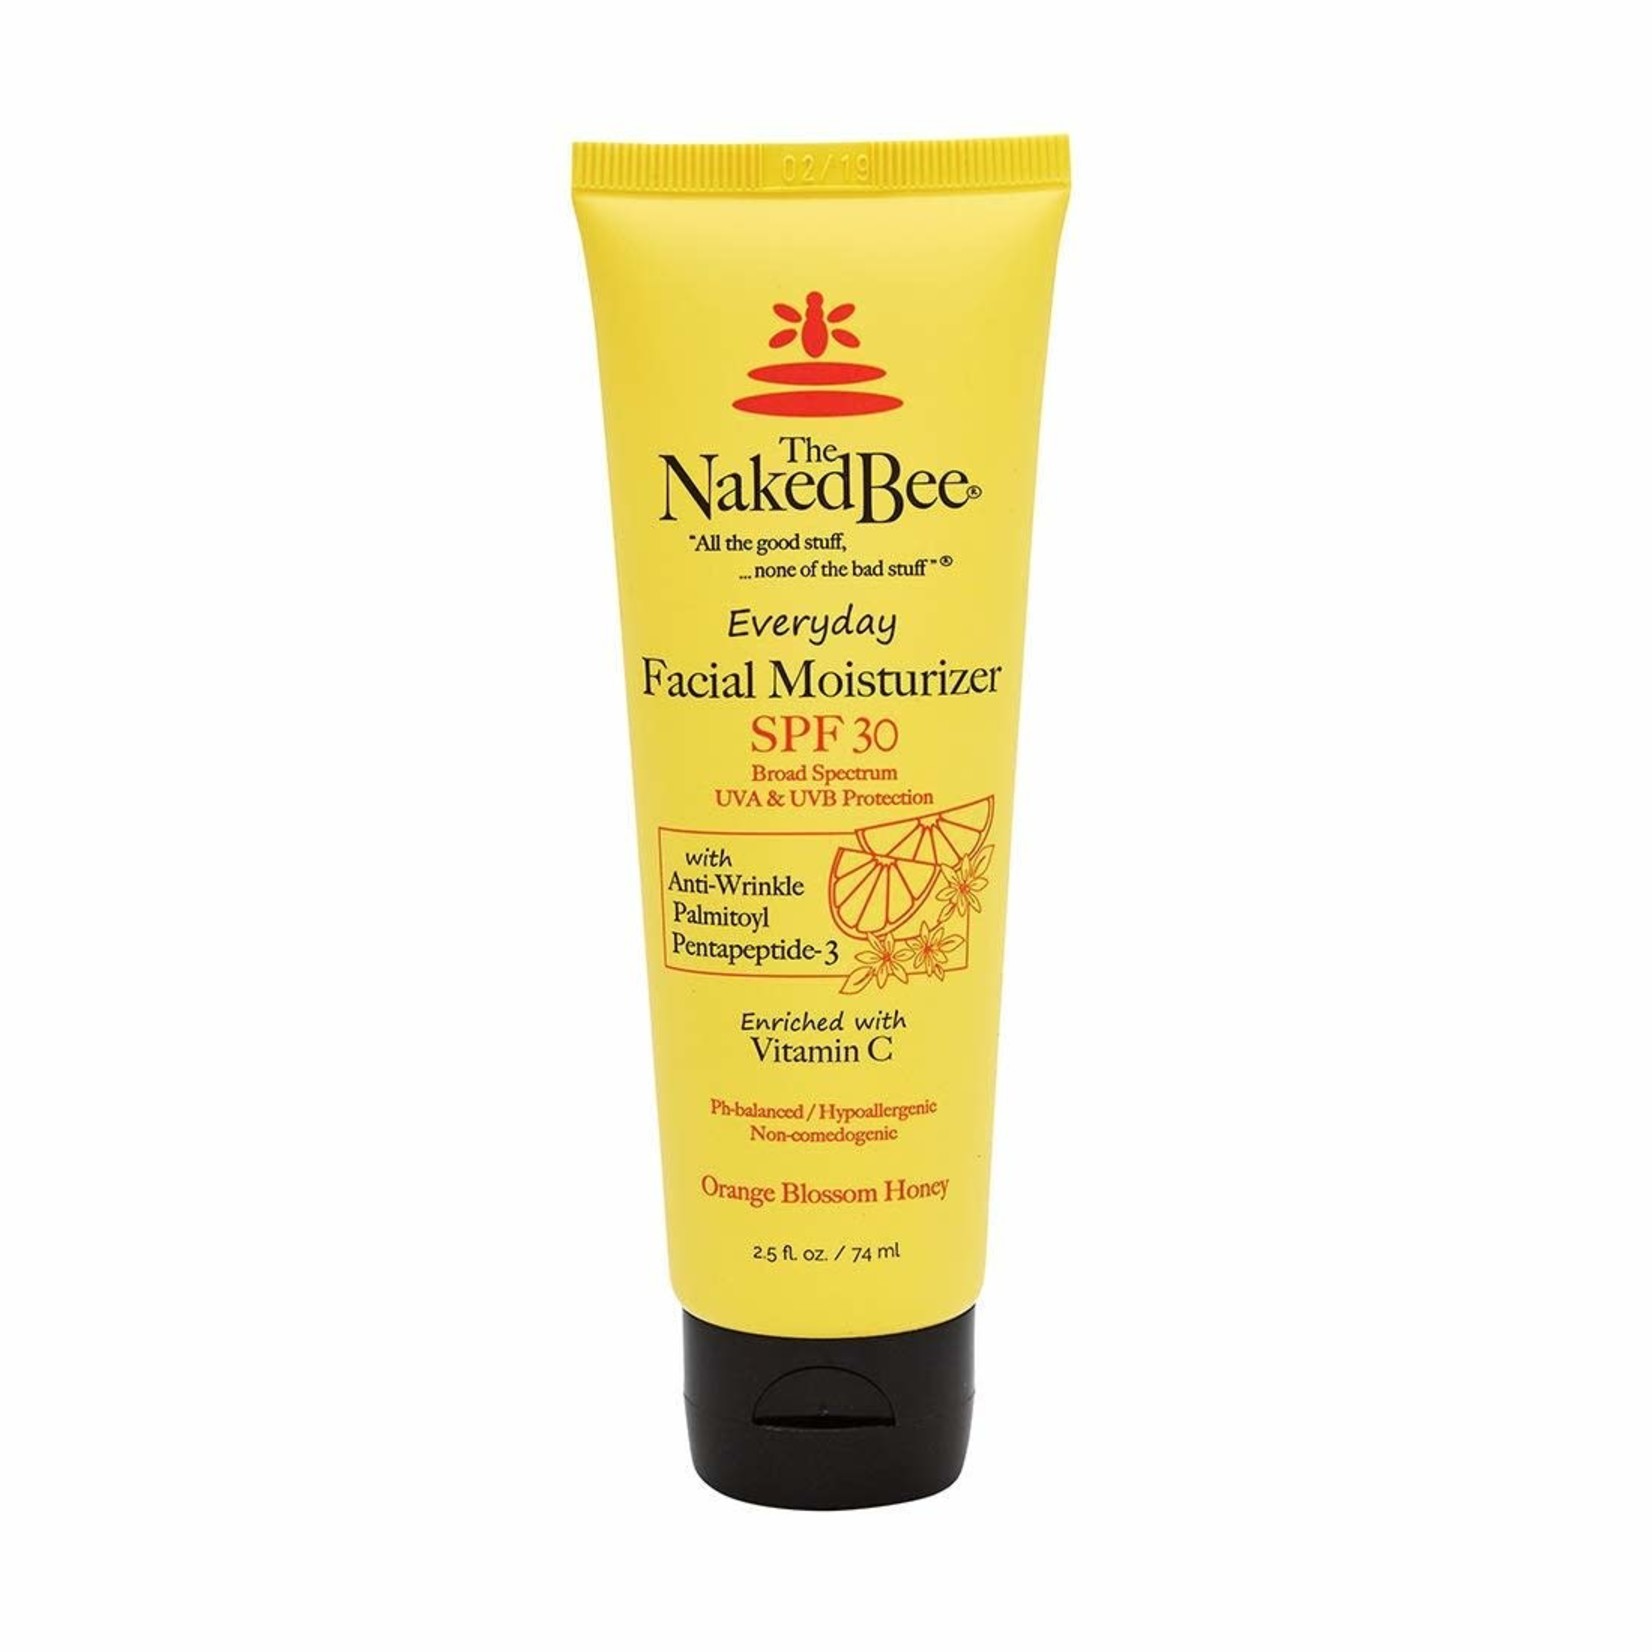 The Naked Bee The Naked Bee Everyday Facial Moisturizer SPF30